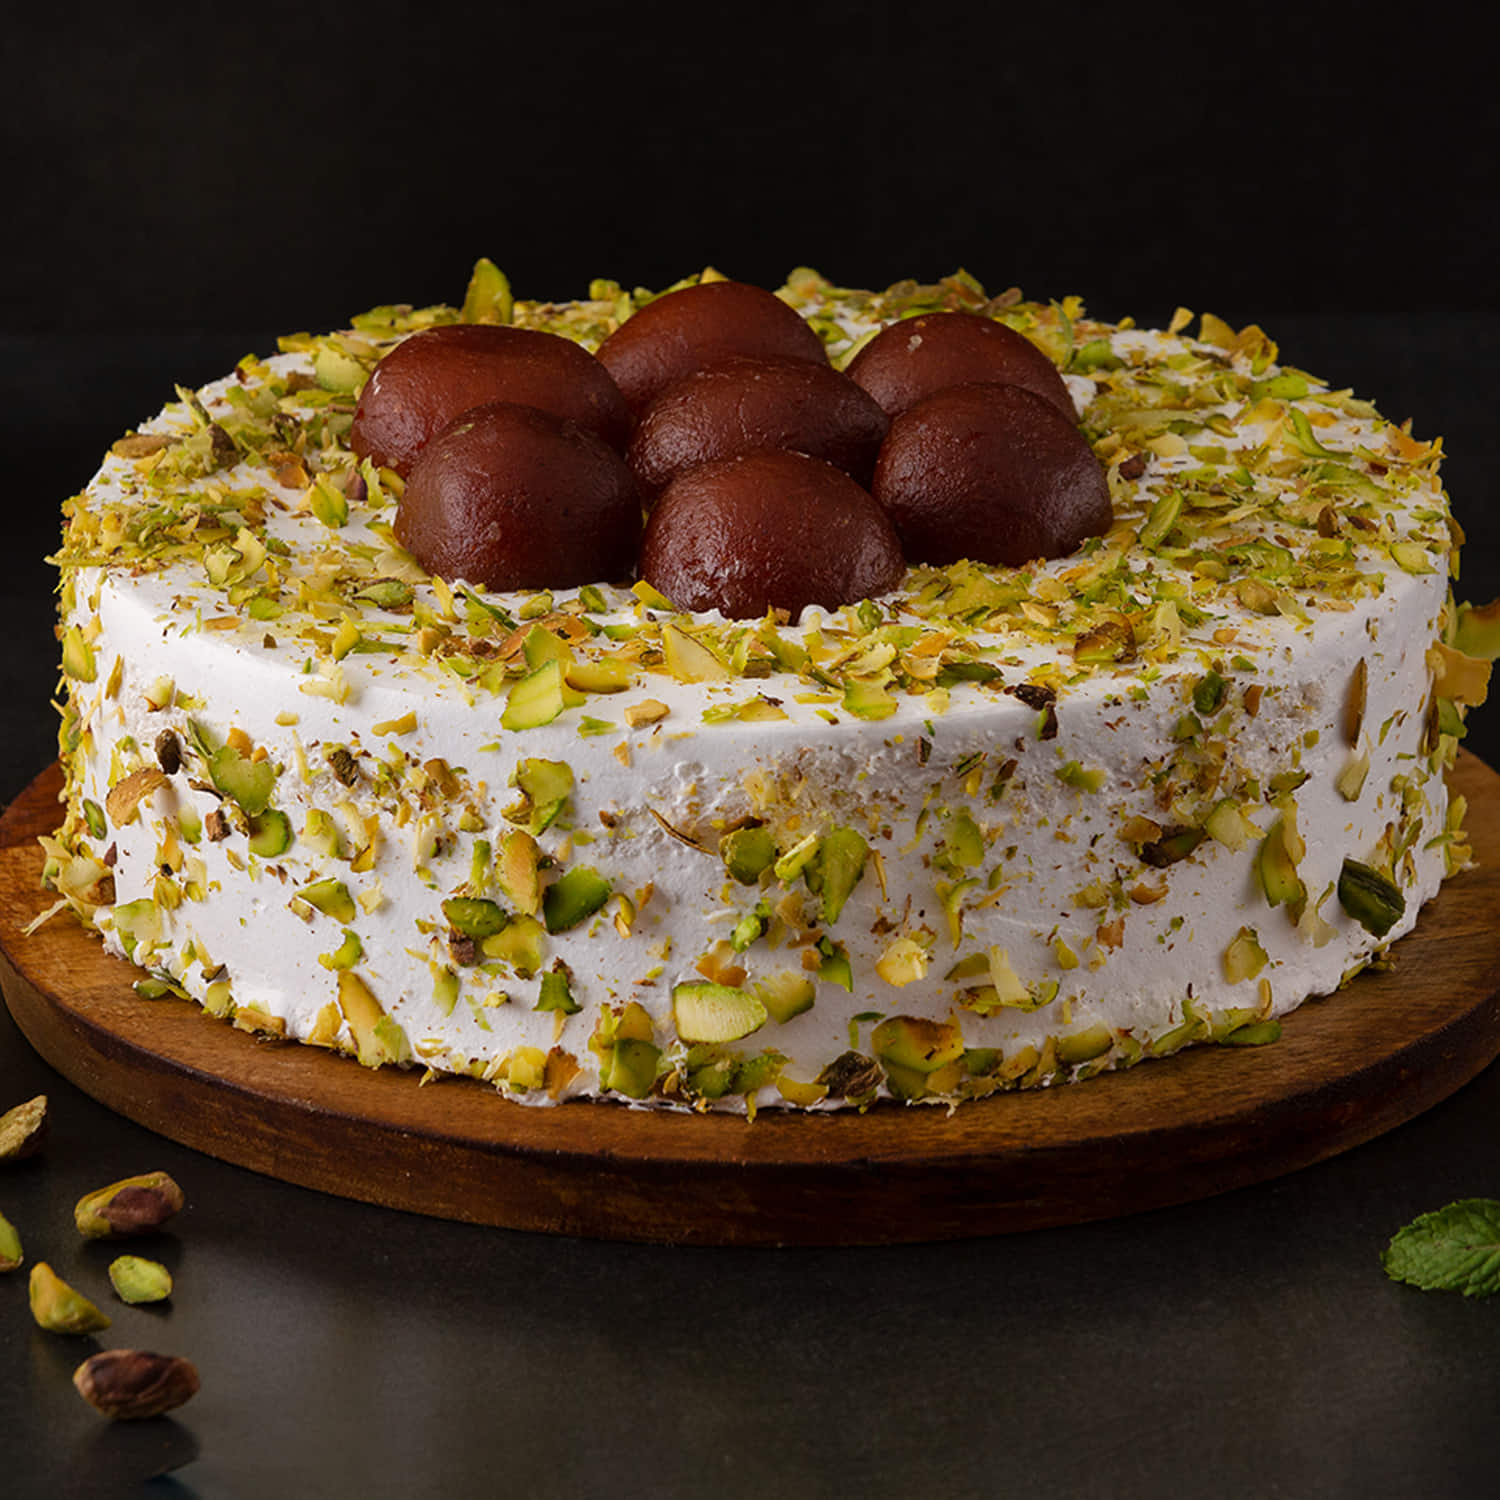 Vanilla Cake with Gulab Jamun Delivery Chennai, Order Cake Online Chennai,  Cake Home Delivery, Send Cake as Gift by Dona Cakes World, Online Shopping  India